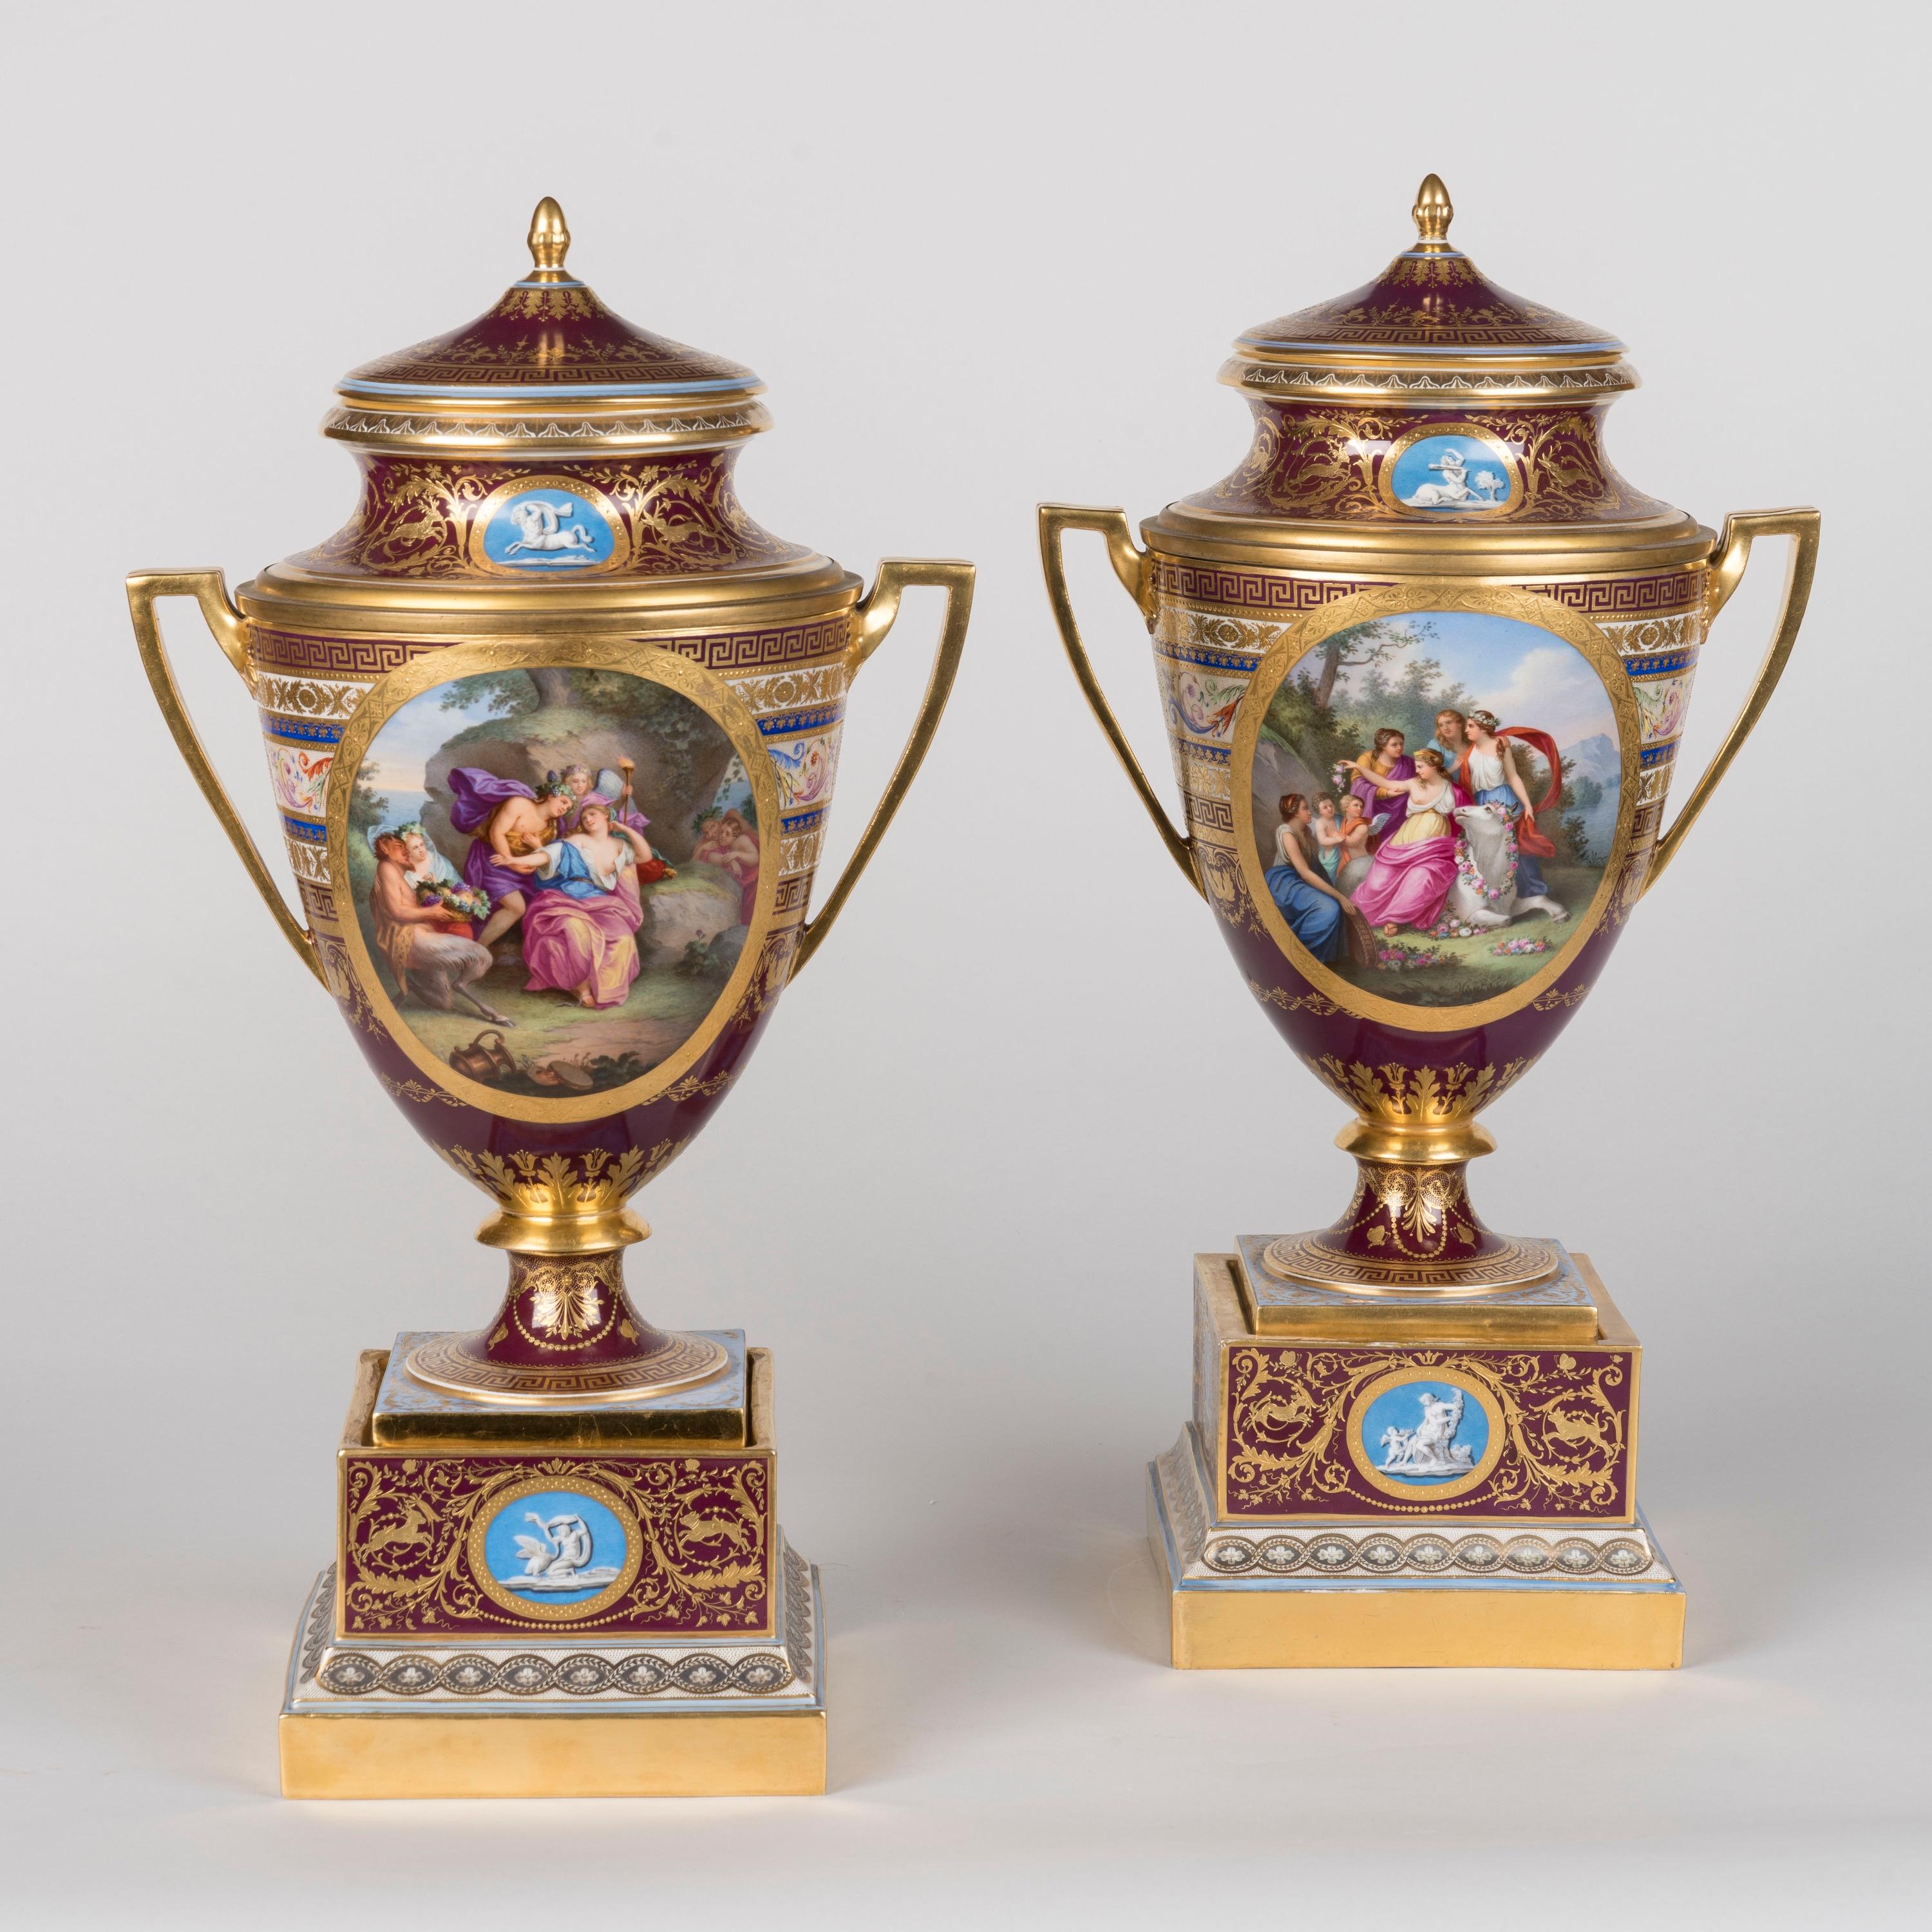 Neoclassical Rare 19th Century Viennese Porcelain Hand-Painted Ice Cream Pail Vases For Sale